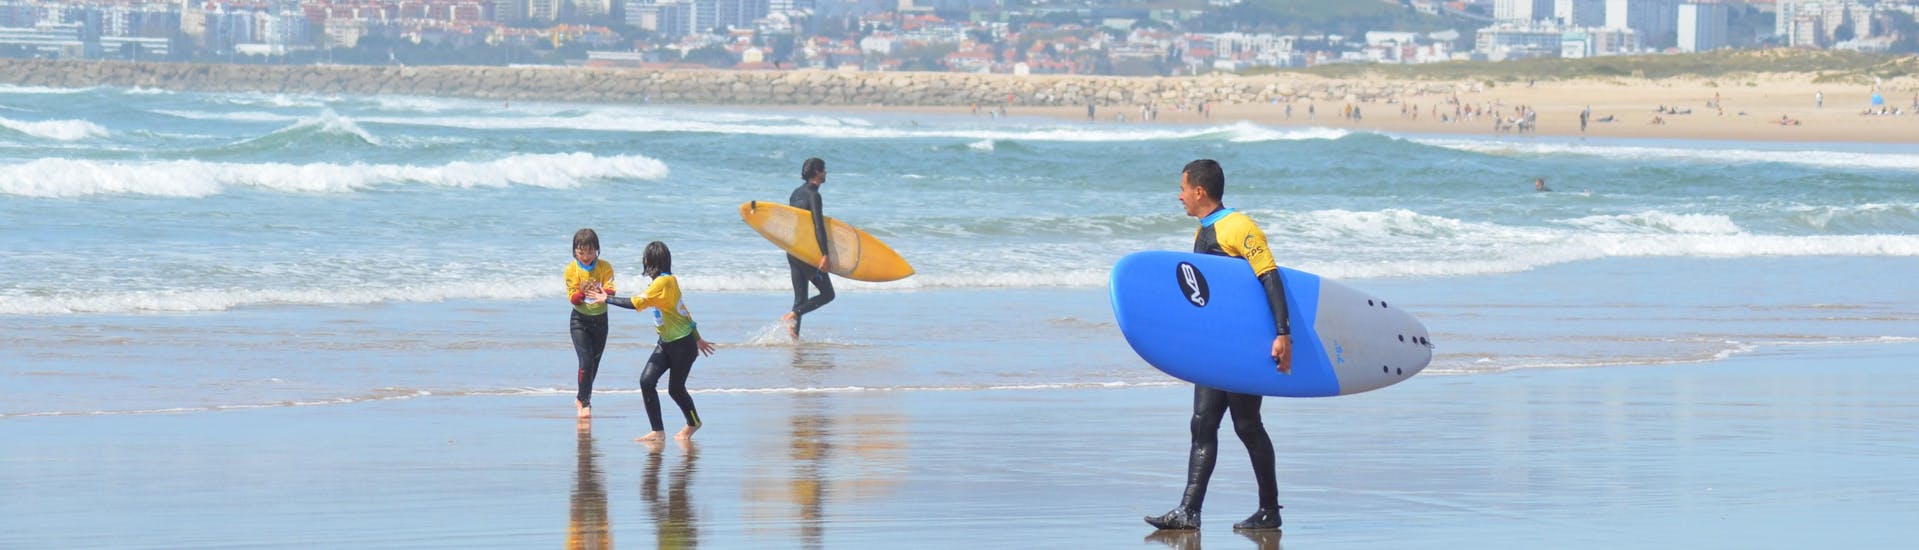 Person carrying surfboard from Portugal Surf School.